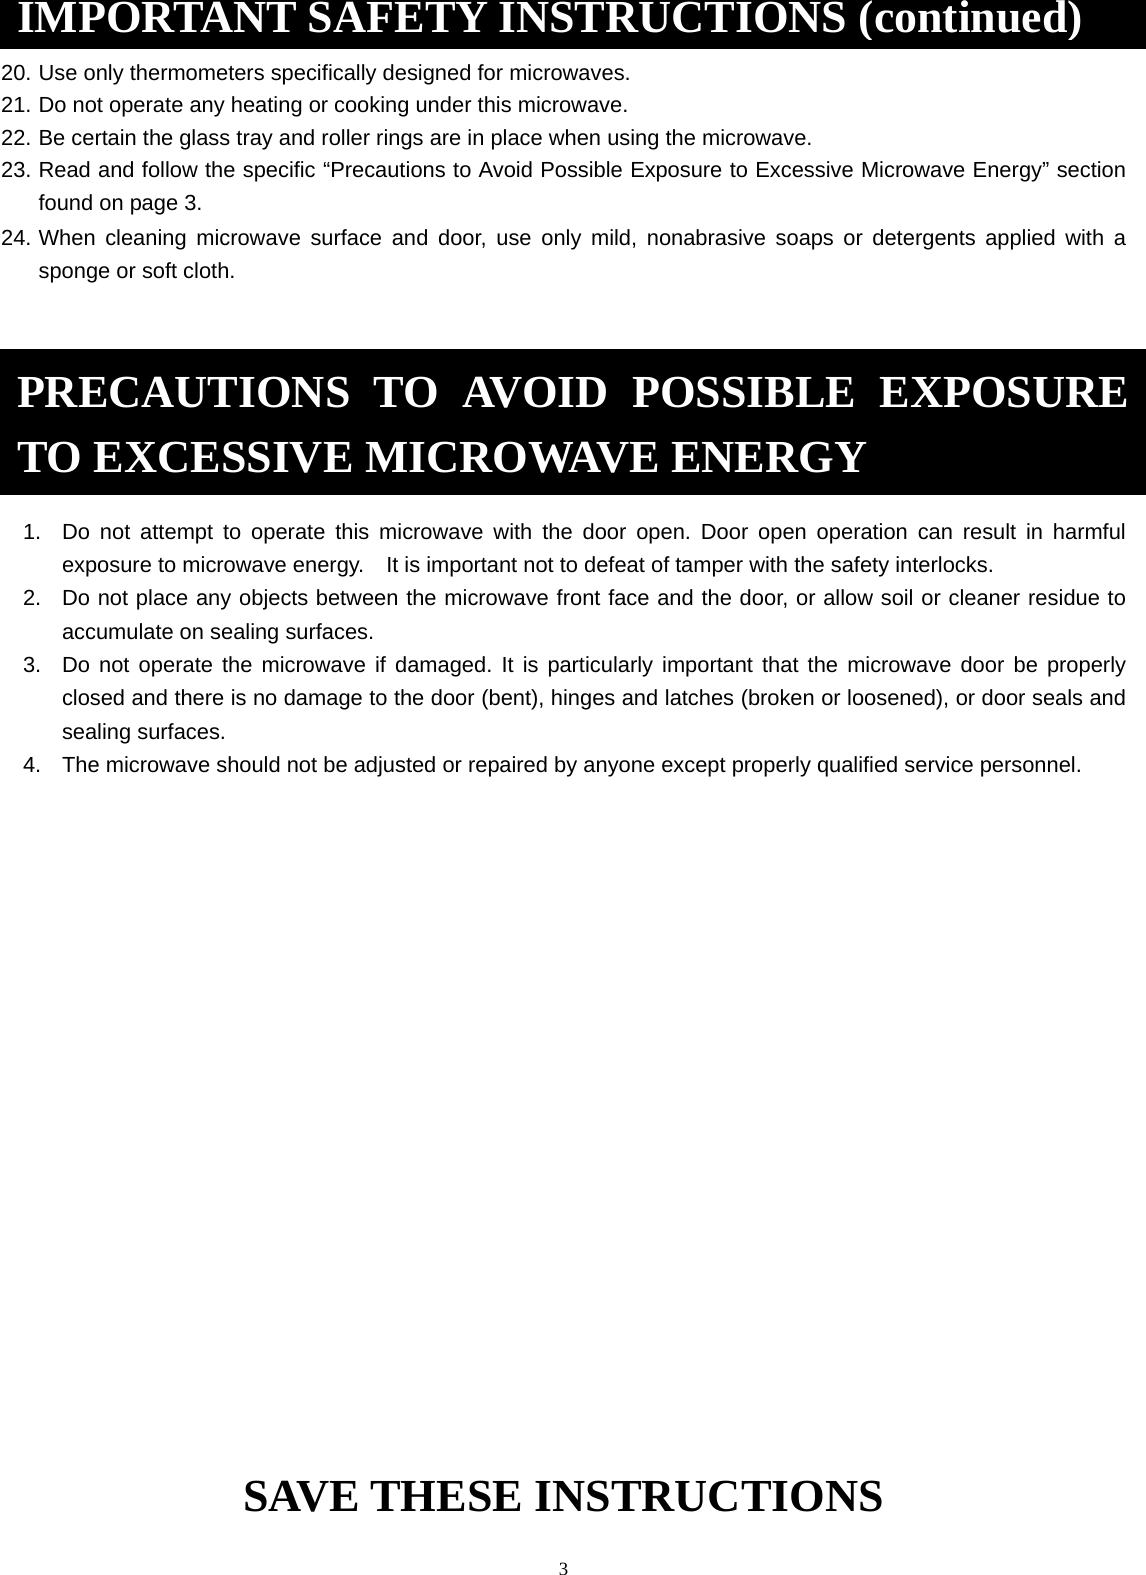  3  20. Use only thermometers specifically designed for microwaves. 21. Do not operate any heating or cooking under this microwave. 22. Be certain the glass tray and roller rings are in place when using the microwave. 23. Read and follow the specific “Precautions to Avoid Possible Exposure to Excessive Microwave Energy” section found on page 3.               24. When cleaning microwave surface and door, use only mild, nonabrasive soaps or detergents applied with a sponge or soft cloth.        1.  Do not attempt to operate this microwave with the door open. Door open operation can result in harmful exposure to microwave energy.    It is important not to defeat of tamper with the safety interlocks. 2.  Do not place any objects between the microwave front face and the door, or allow soil or cleaner residue to accumulate on sealing surfaces. 3.  Do not operate the microwave if damaged. It is particularly important that the microwave door be properly closed and there is no damage to the door (bent), hinges and latches (broken or loosened), or door seals and sealing surfaces. 4.  The microwave should not be adjusted or repaired by anyone except properly qualified service personnel.            SAVE THESE INSTRUCTIONS IMPORTANT SAFETY INSTRUCTIONS (continued)PRECAUTIONS TO AVOID POSSIBLE EXPOSURE TO EXCESSIVE MICROWAVE ENERGY 